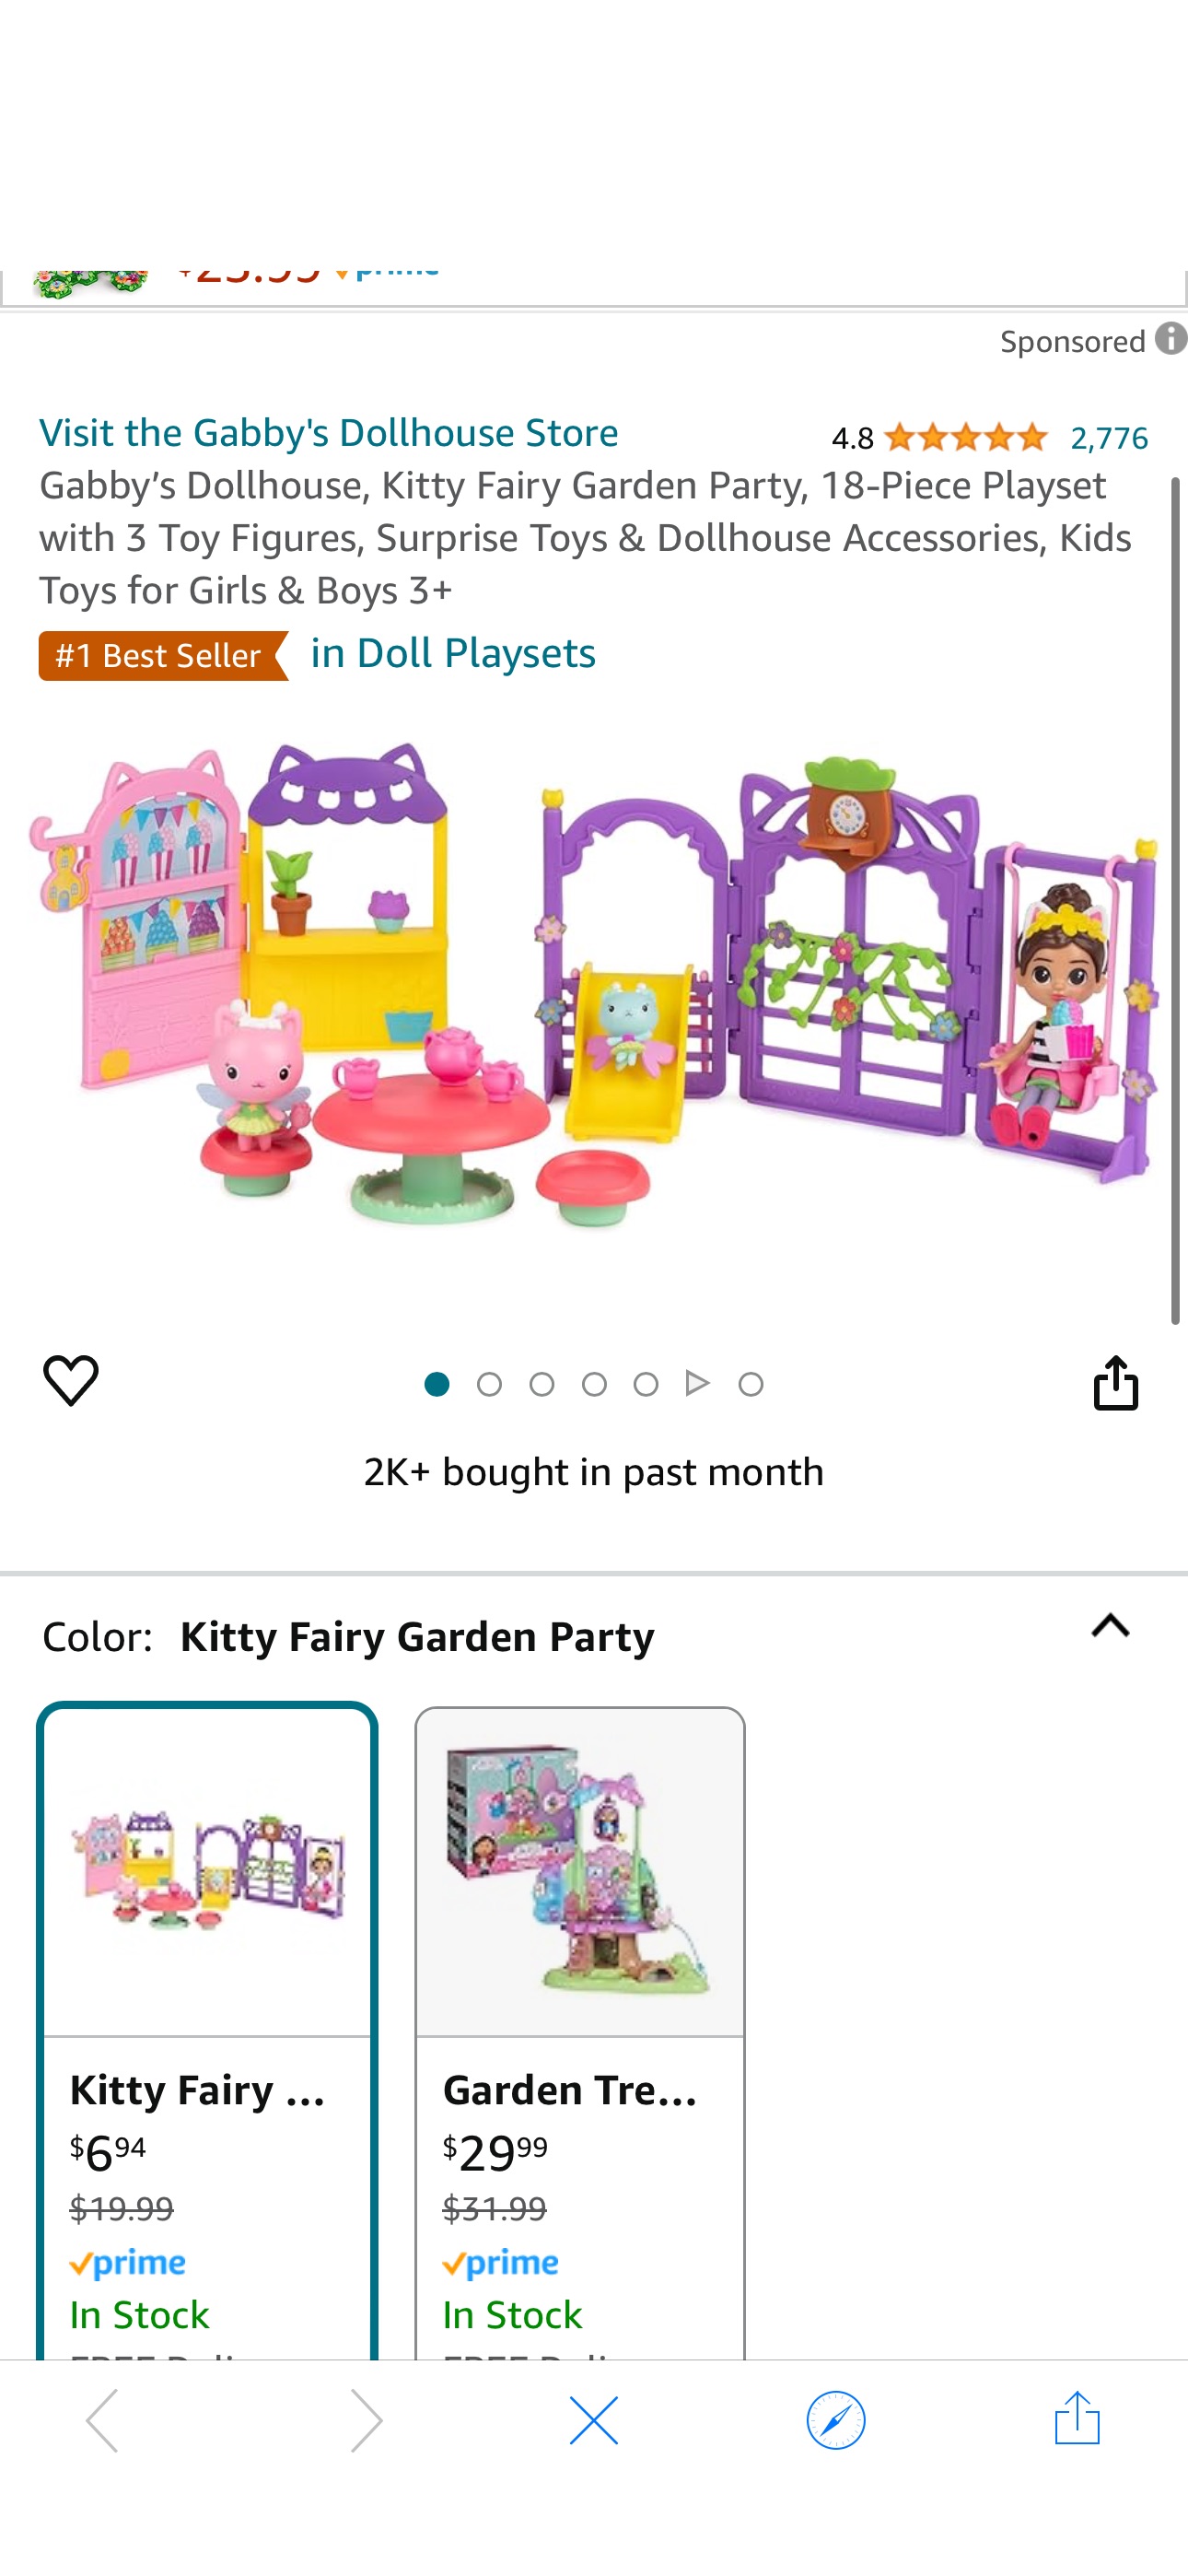 Amazon.com: Gabby’s Dollhouse, Kitty Fairy Garden Party, 18-Piece Playset with 3 Toy Figures, Surprise Toys & Dollhouse Accessories, Kids Toys for Girls & Boys 3+ : Toys & Games